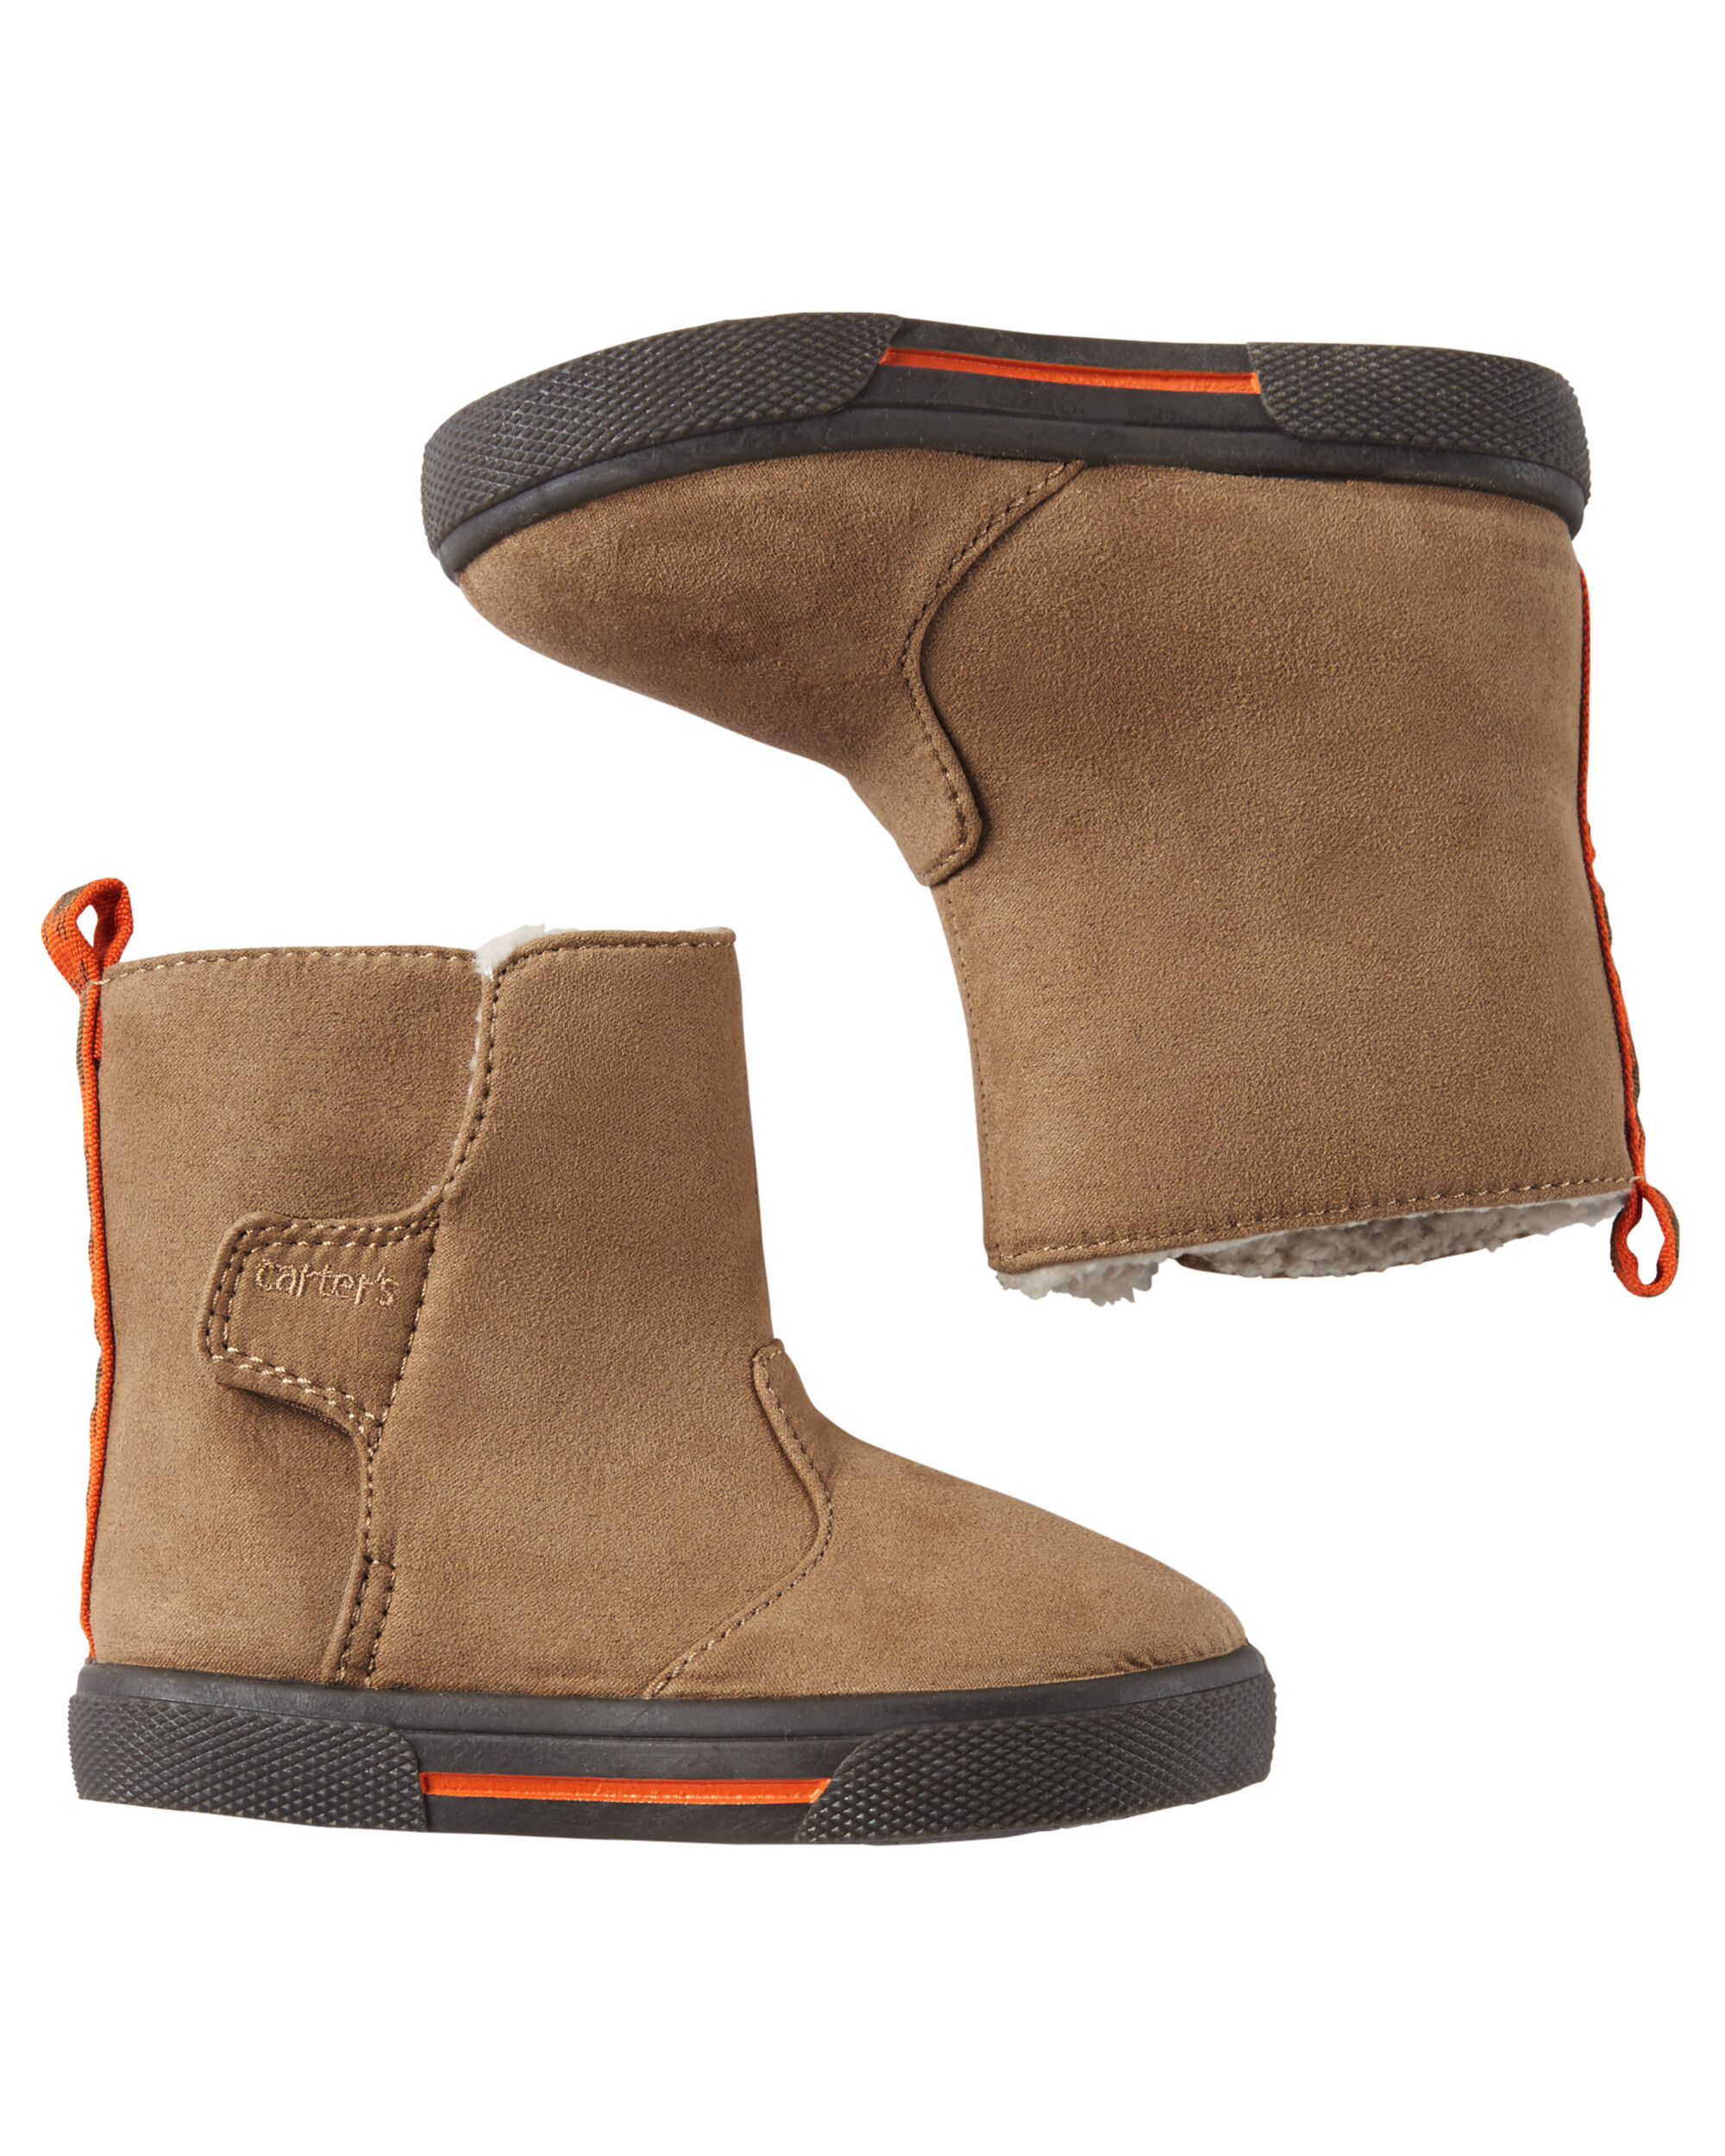 carters boys boots